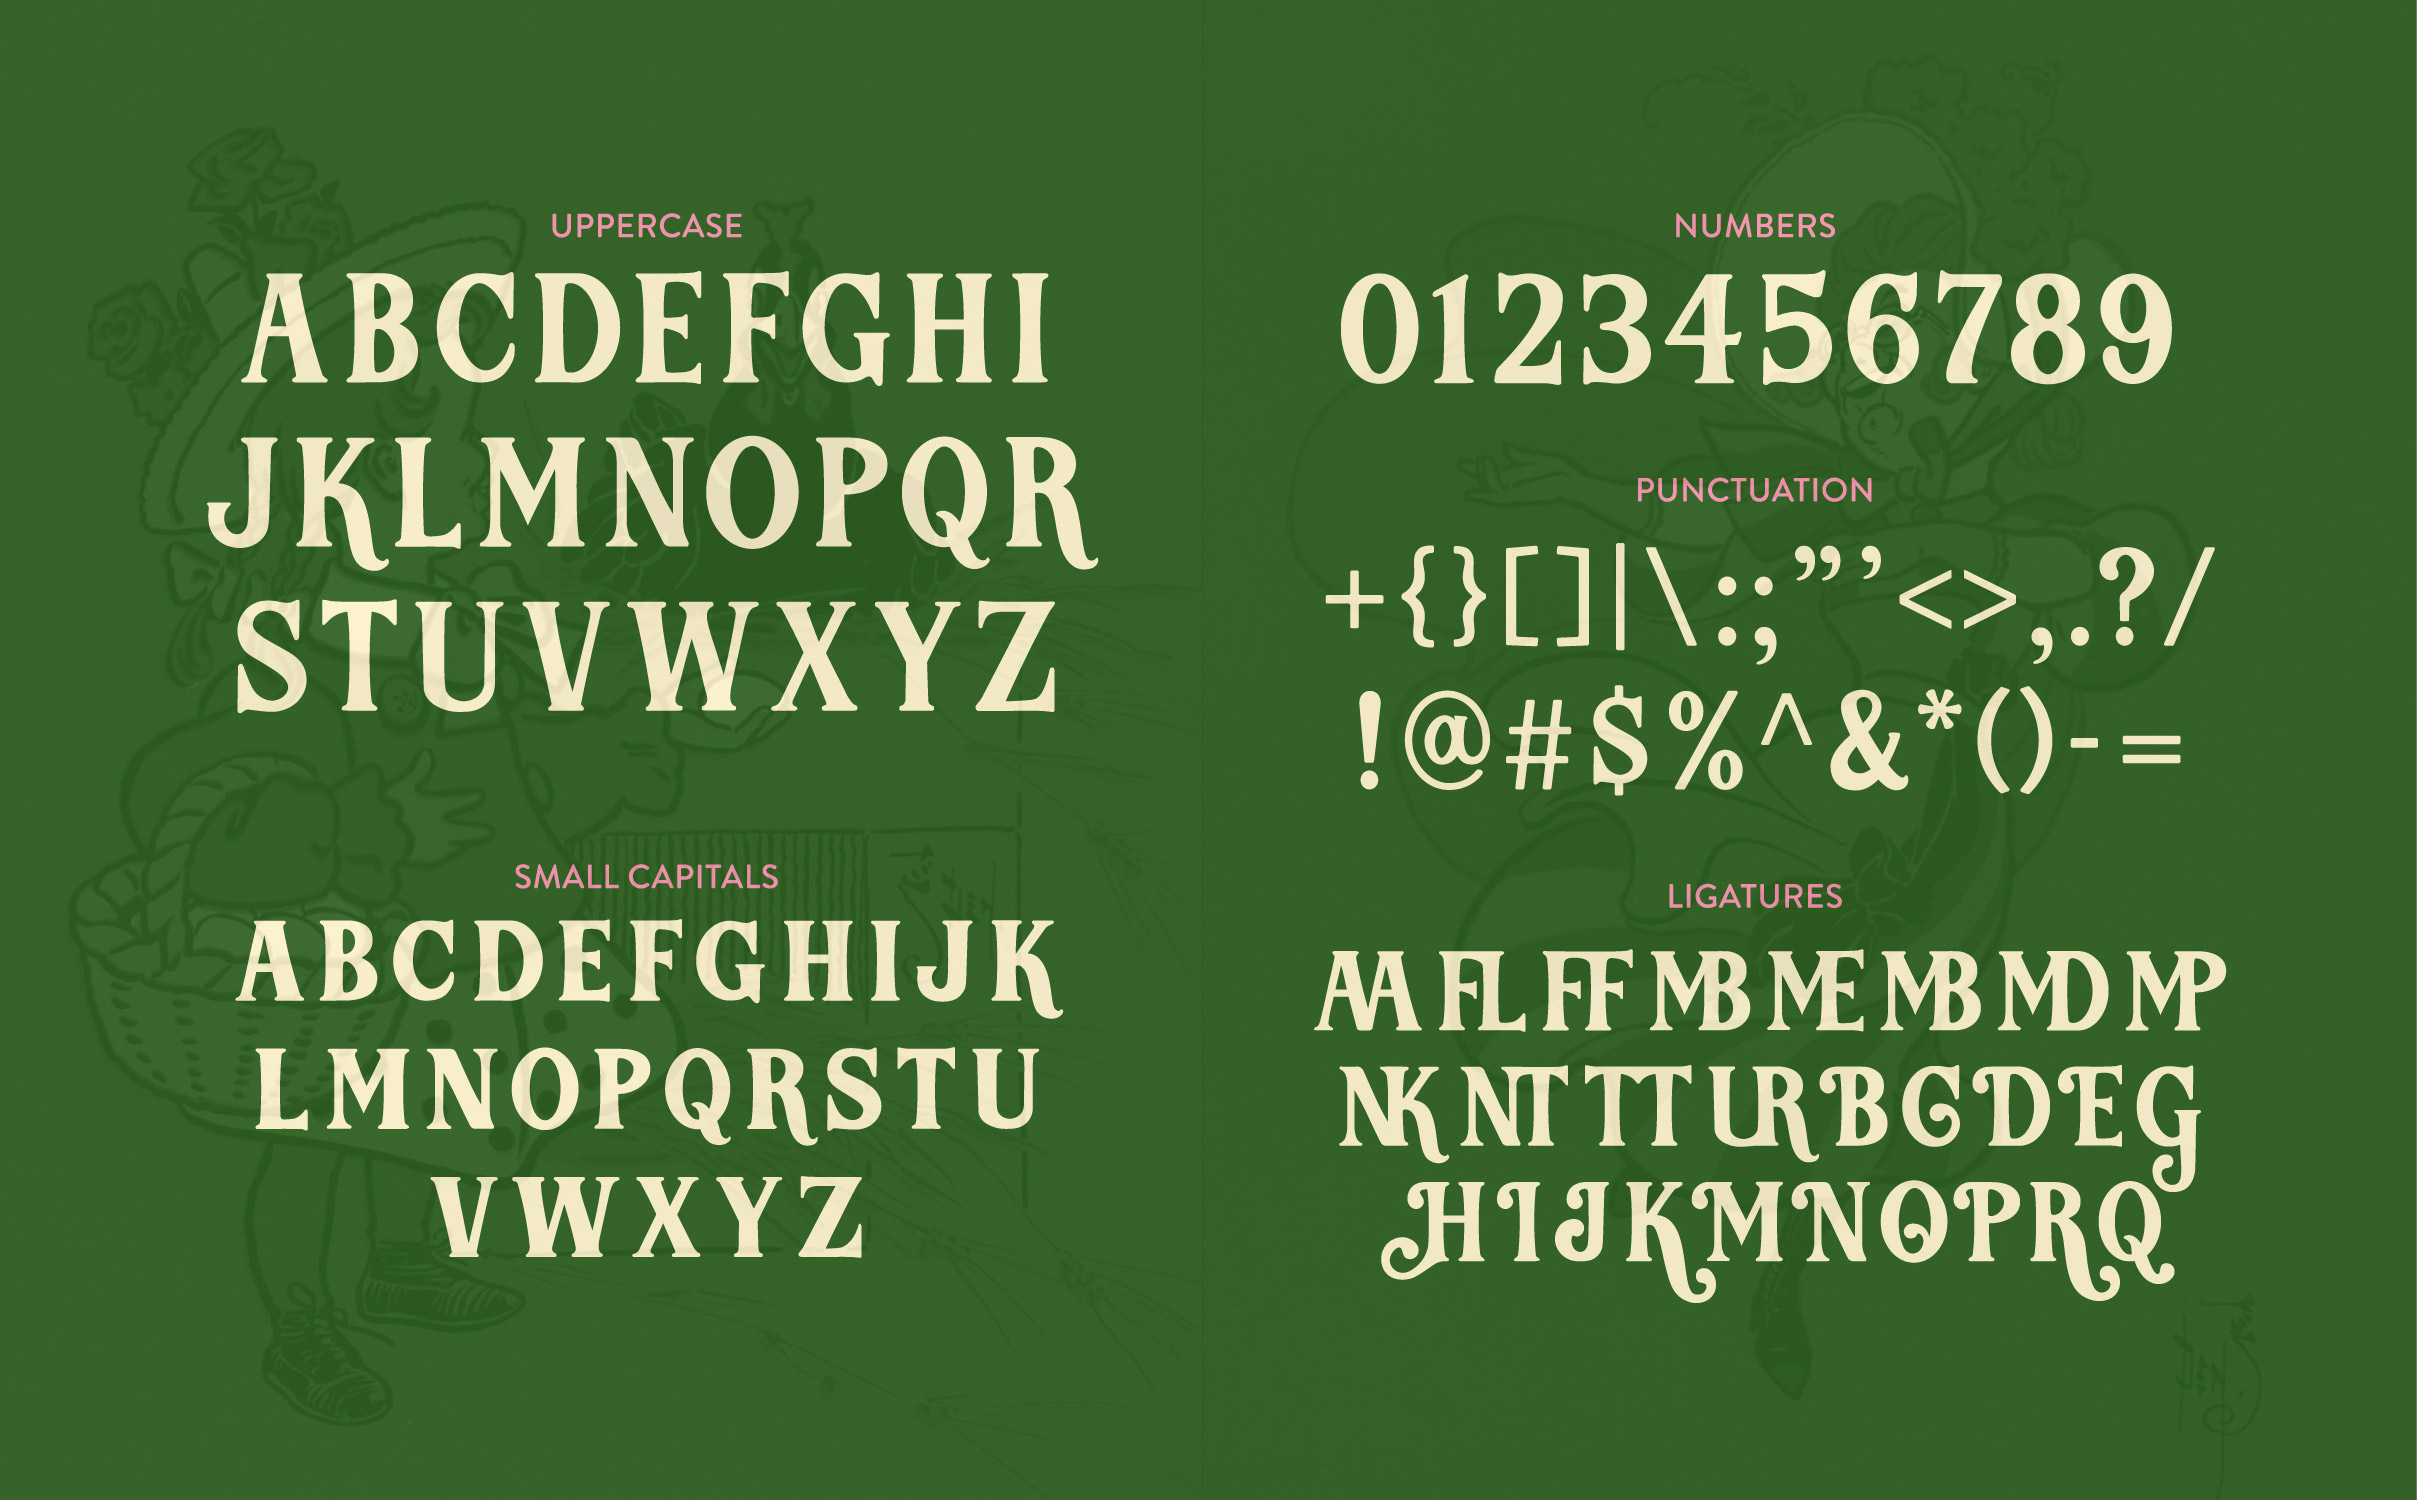 Image of the Miss Nelson typeface showing the full glyph set